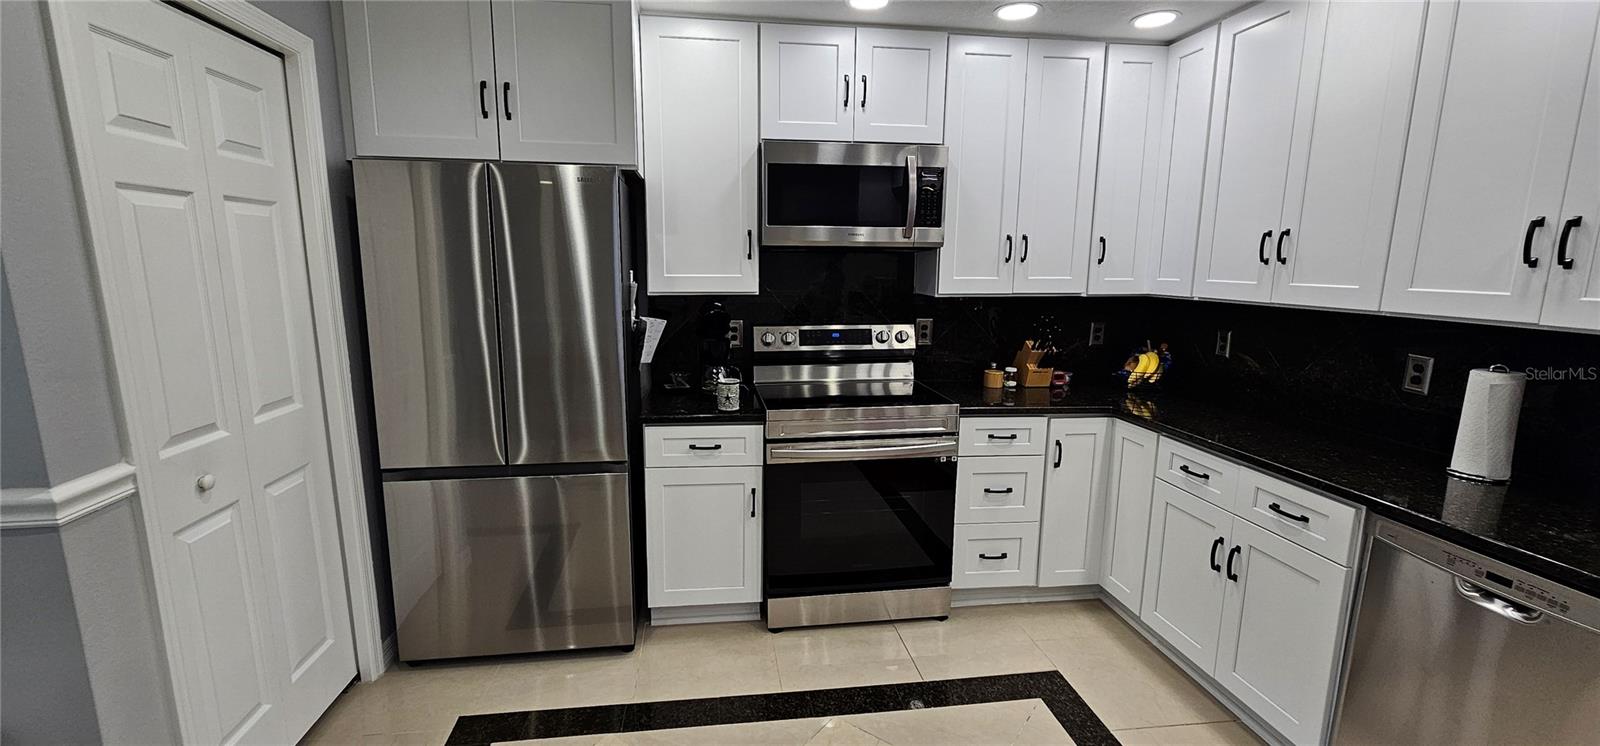 Your Beautifully updated kitchen with new stainless steel appliances